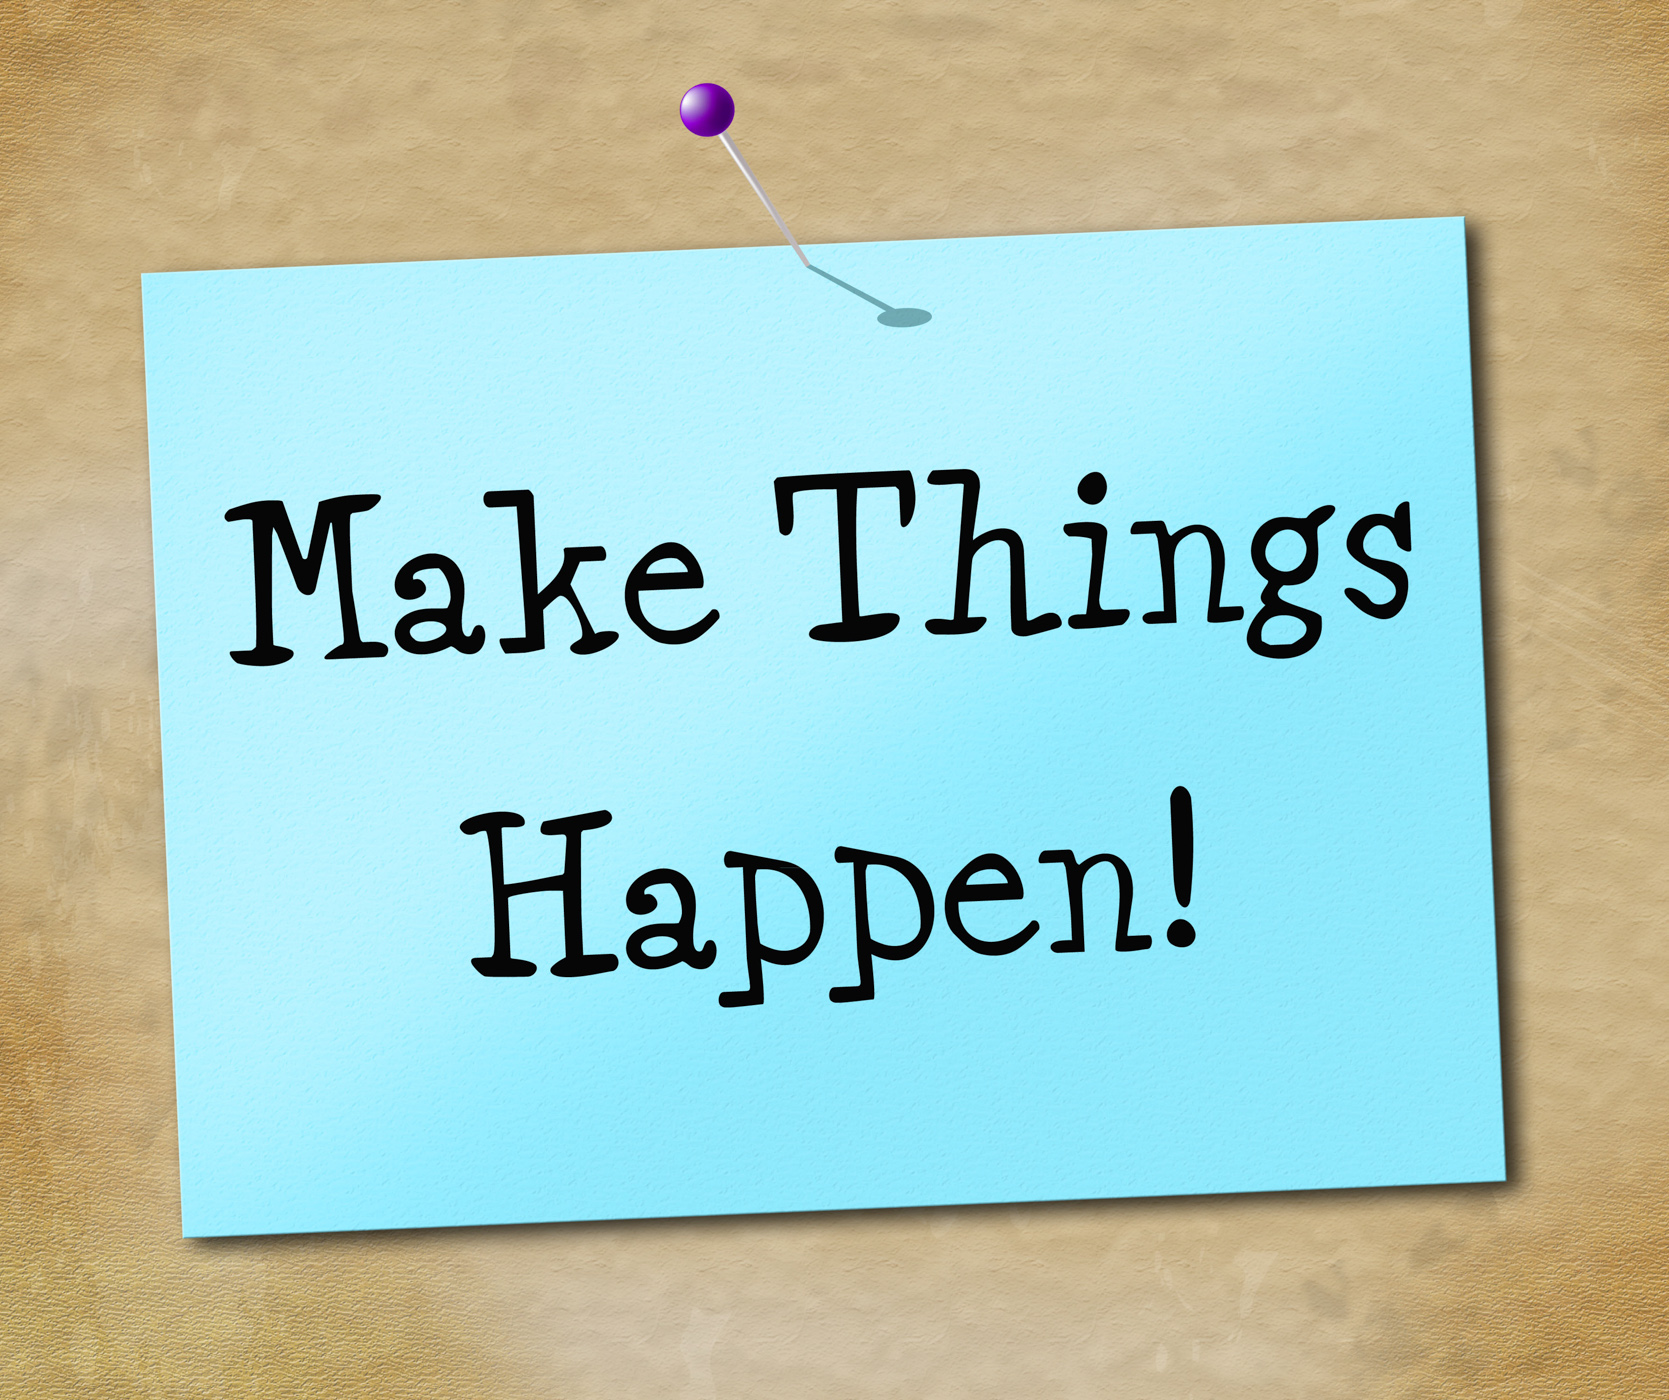 Make things hapen represents achieve motivate and motivating photo